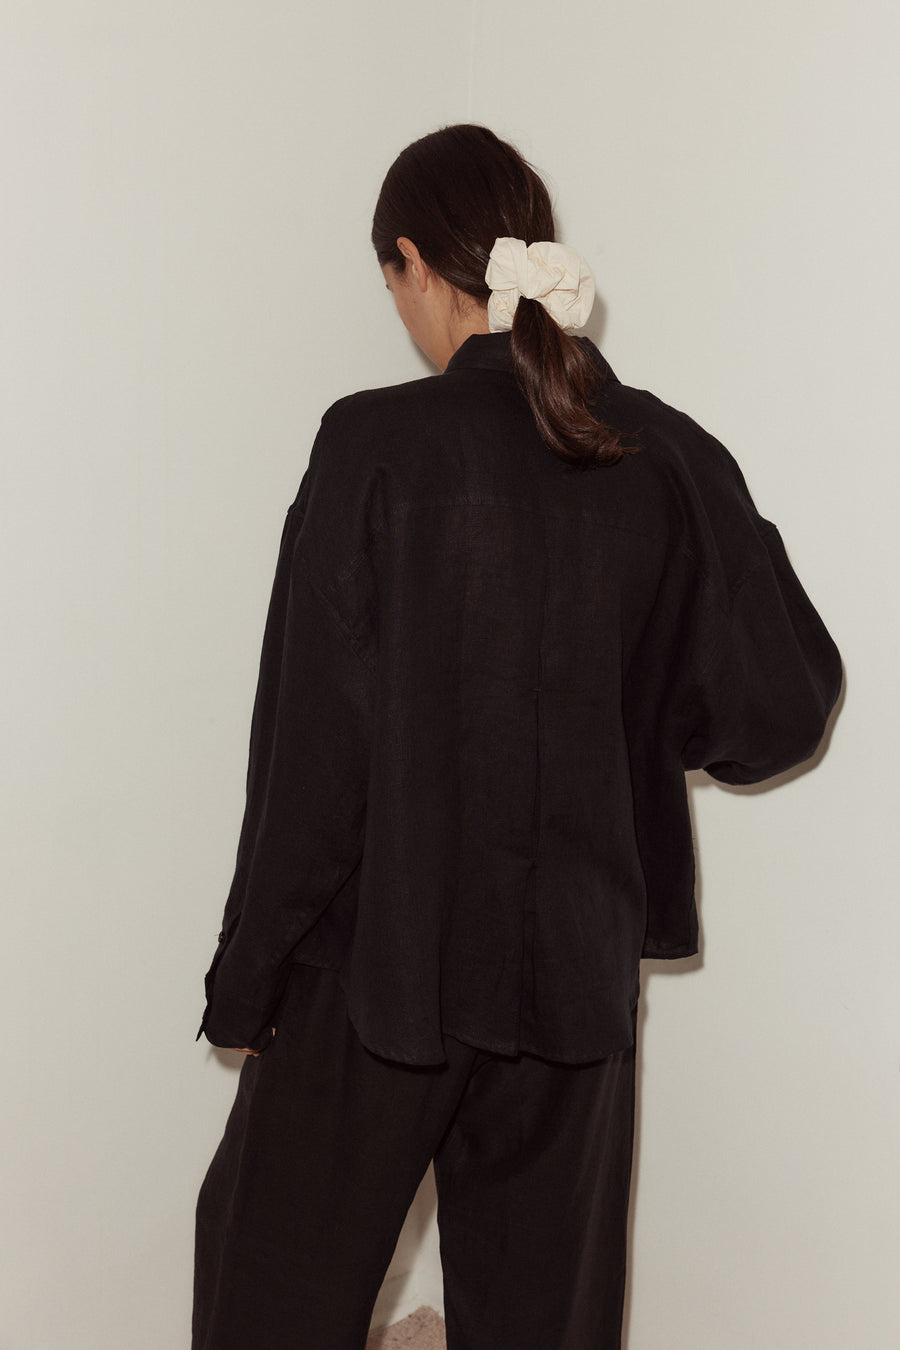 Back shot of female model wearing the tack Set by Deiji Studios in black. Shirt featured dropped shoulder and dropped back yoke for a relaxed look.